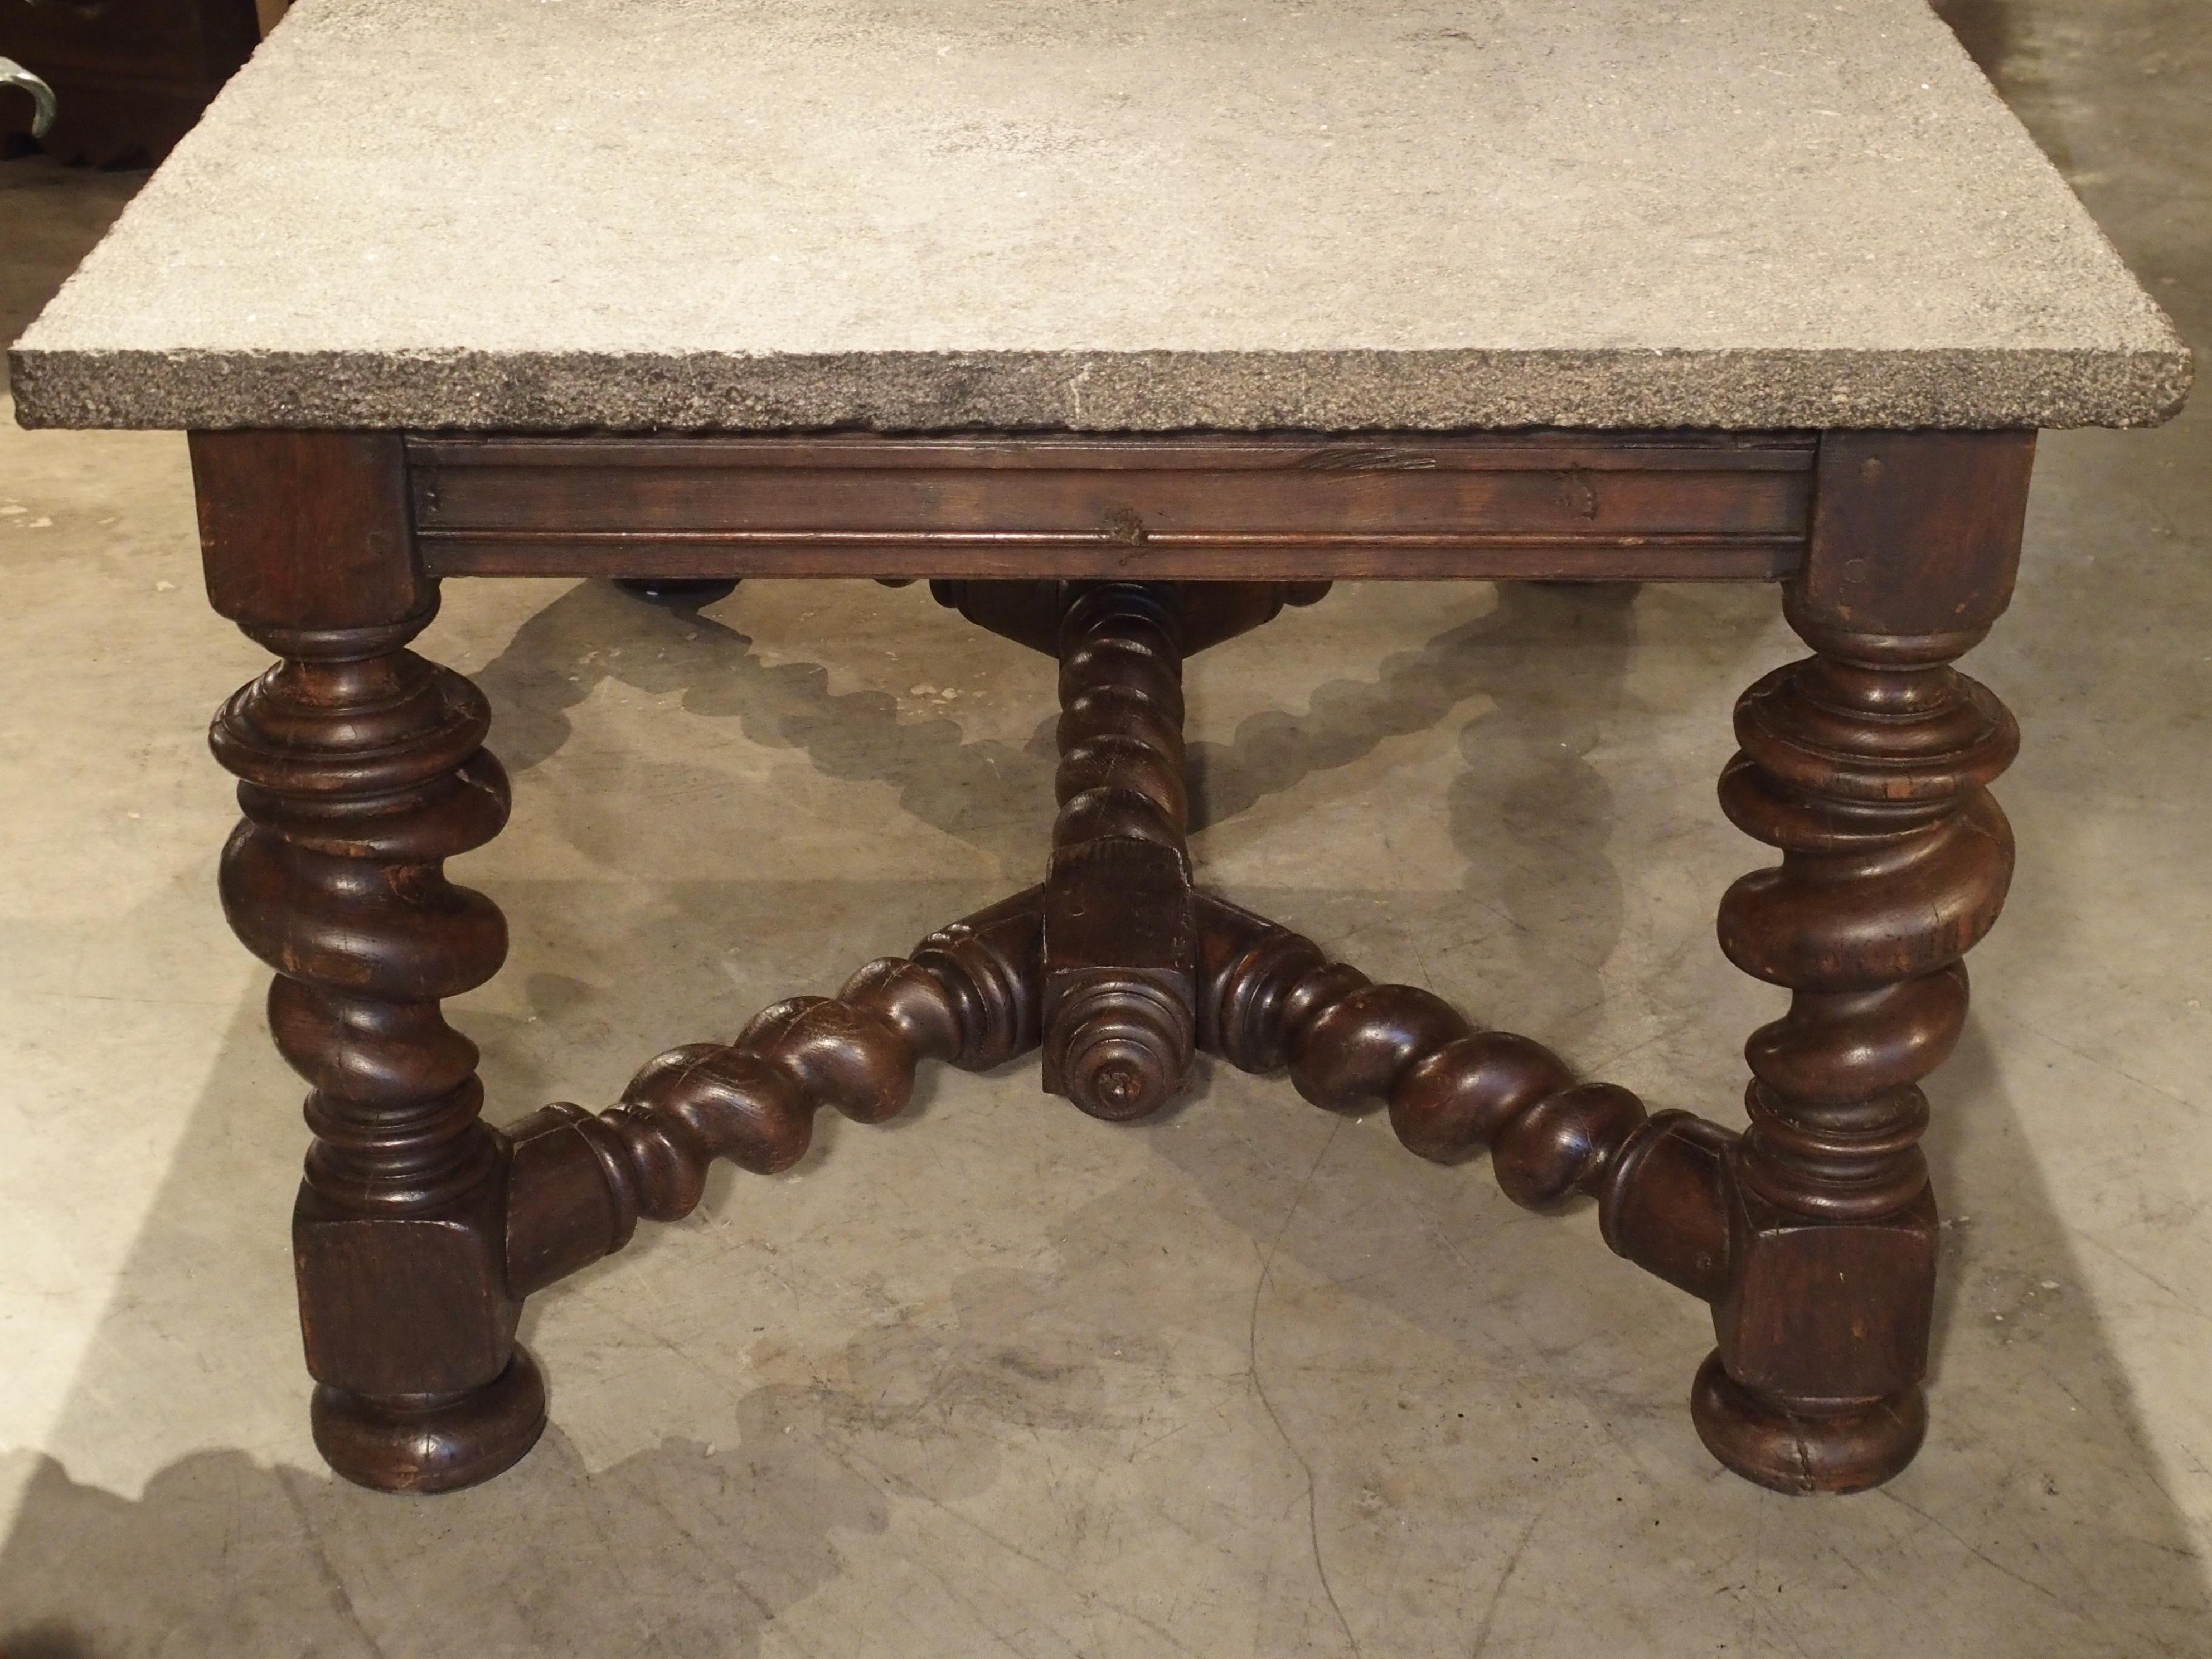 Stone Impressive French Oak Table with Large Turned Legs and Bluestone Top, C. 1850